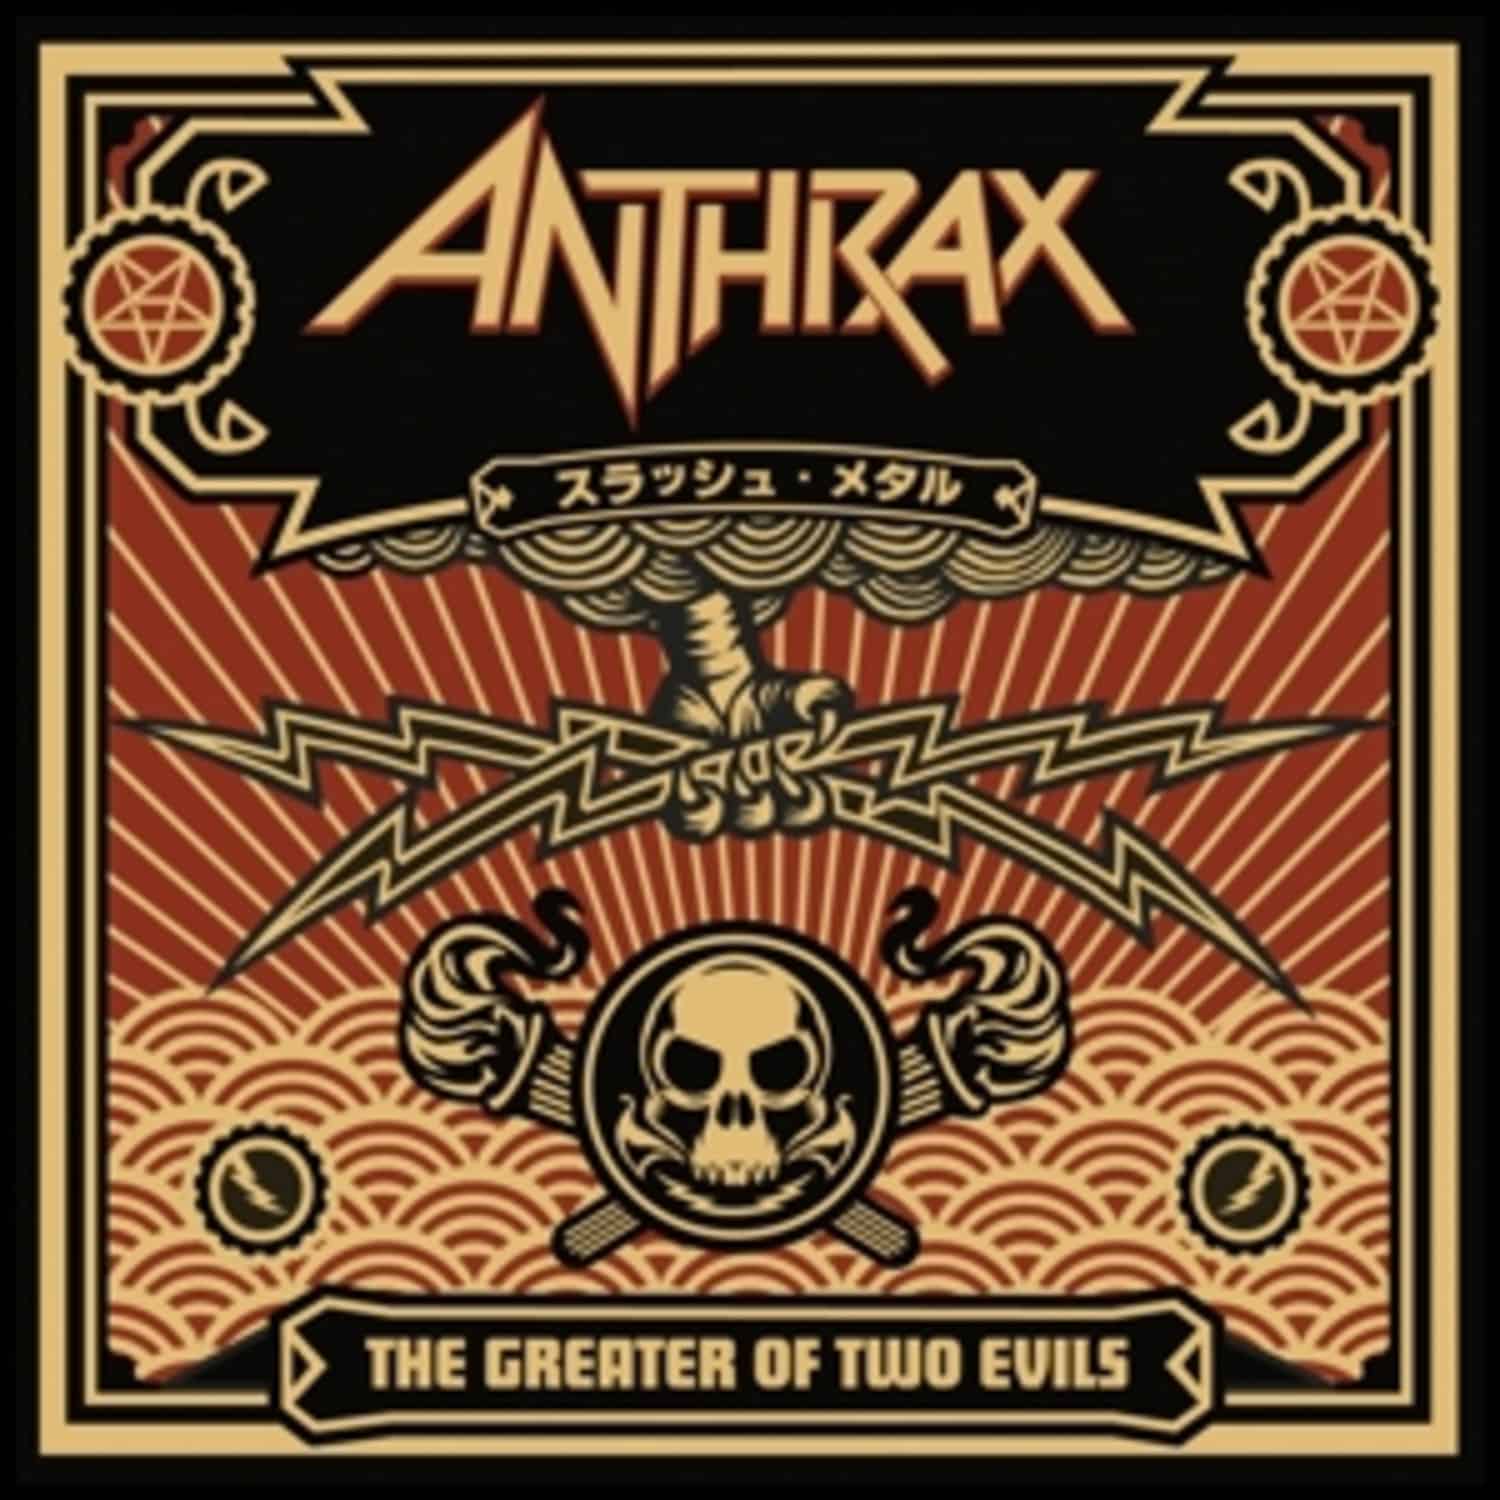 Anthrax - THE GREATER OF TWO EVILS 